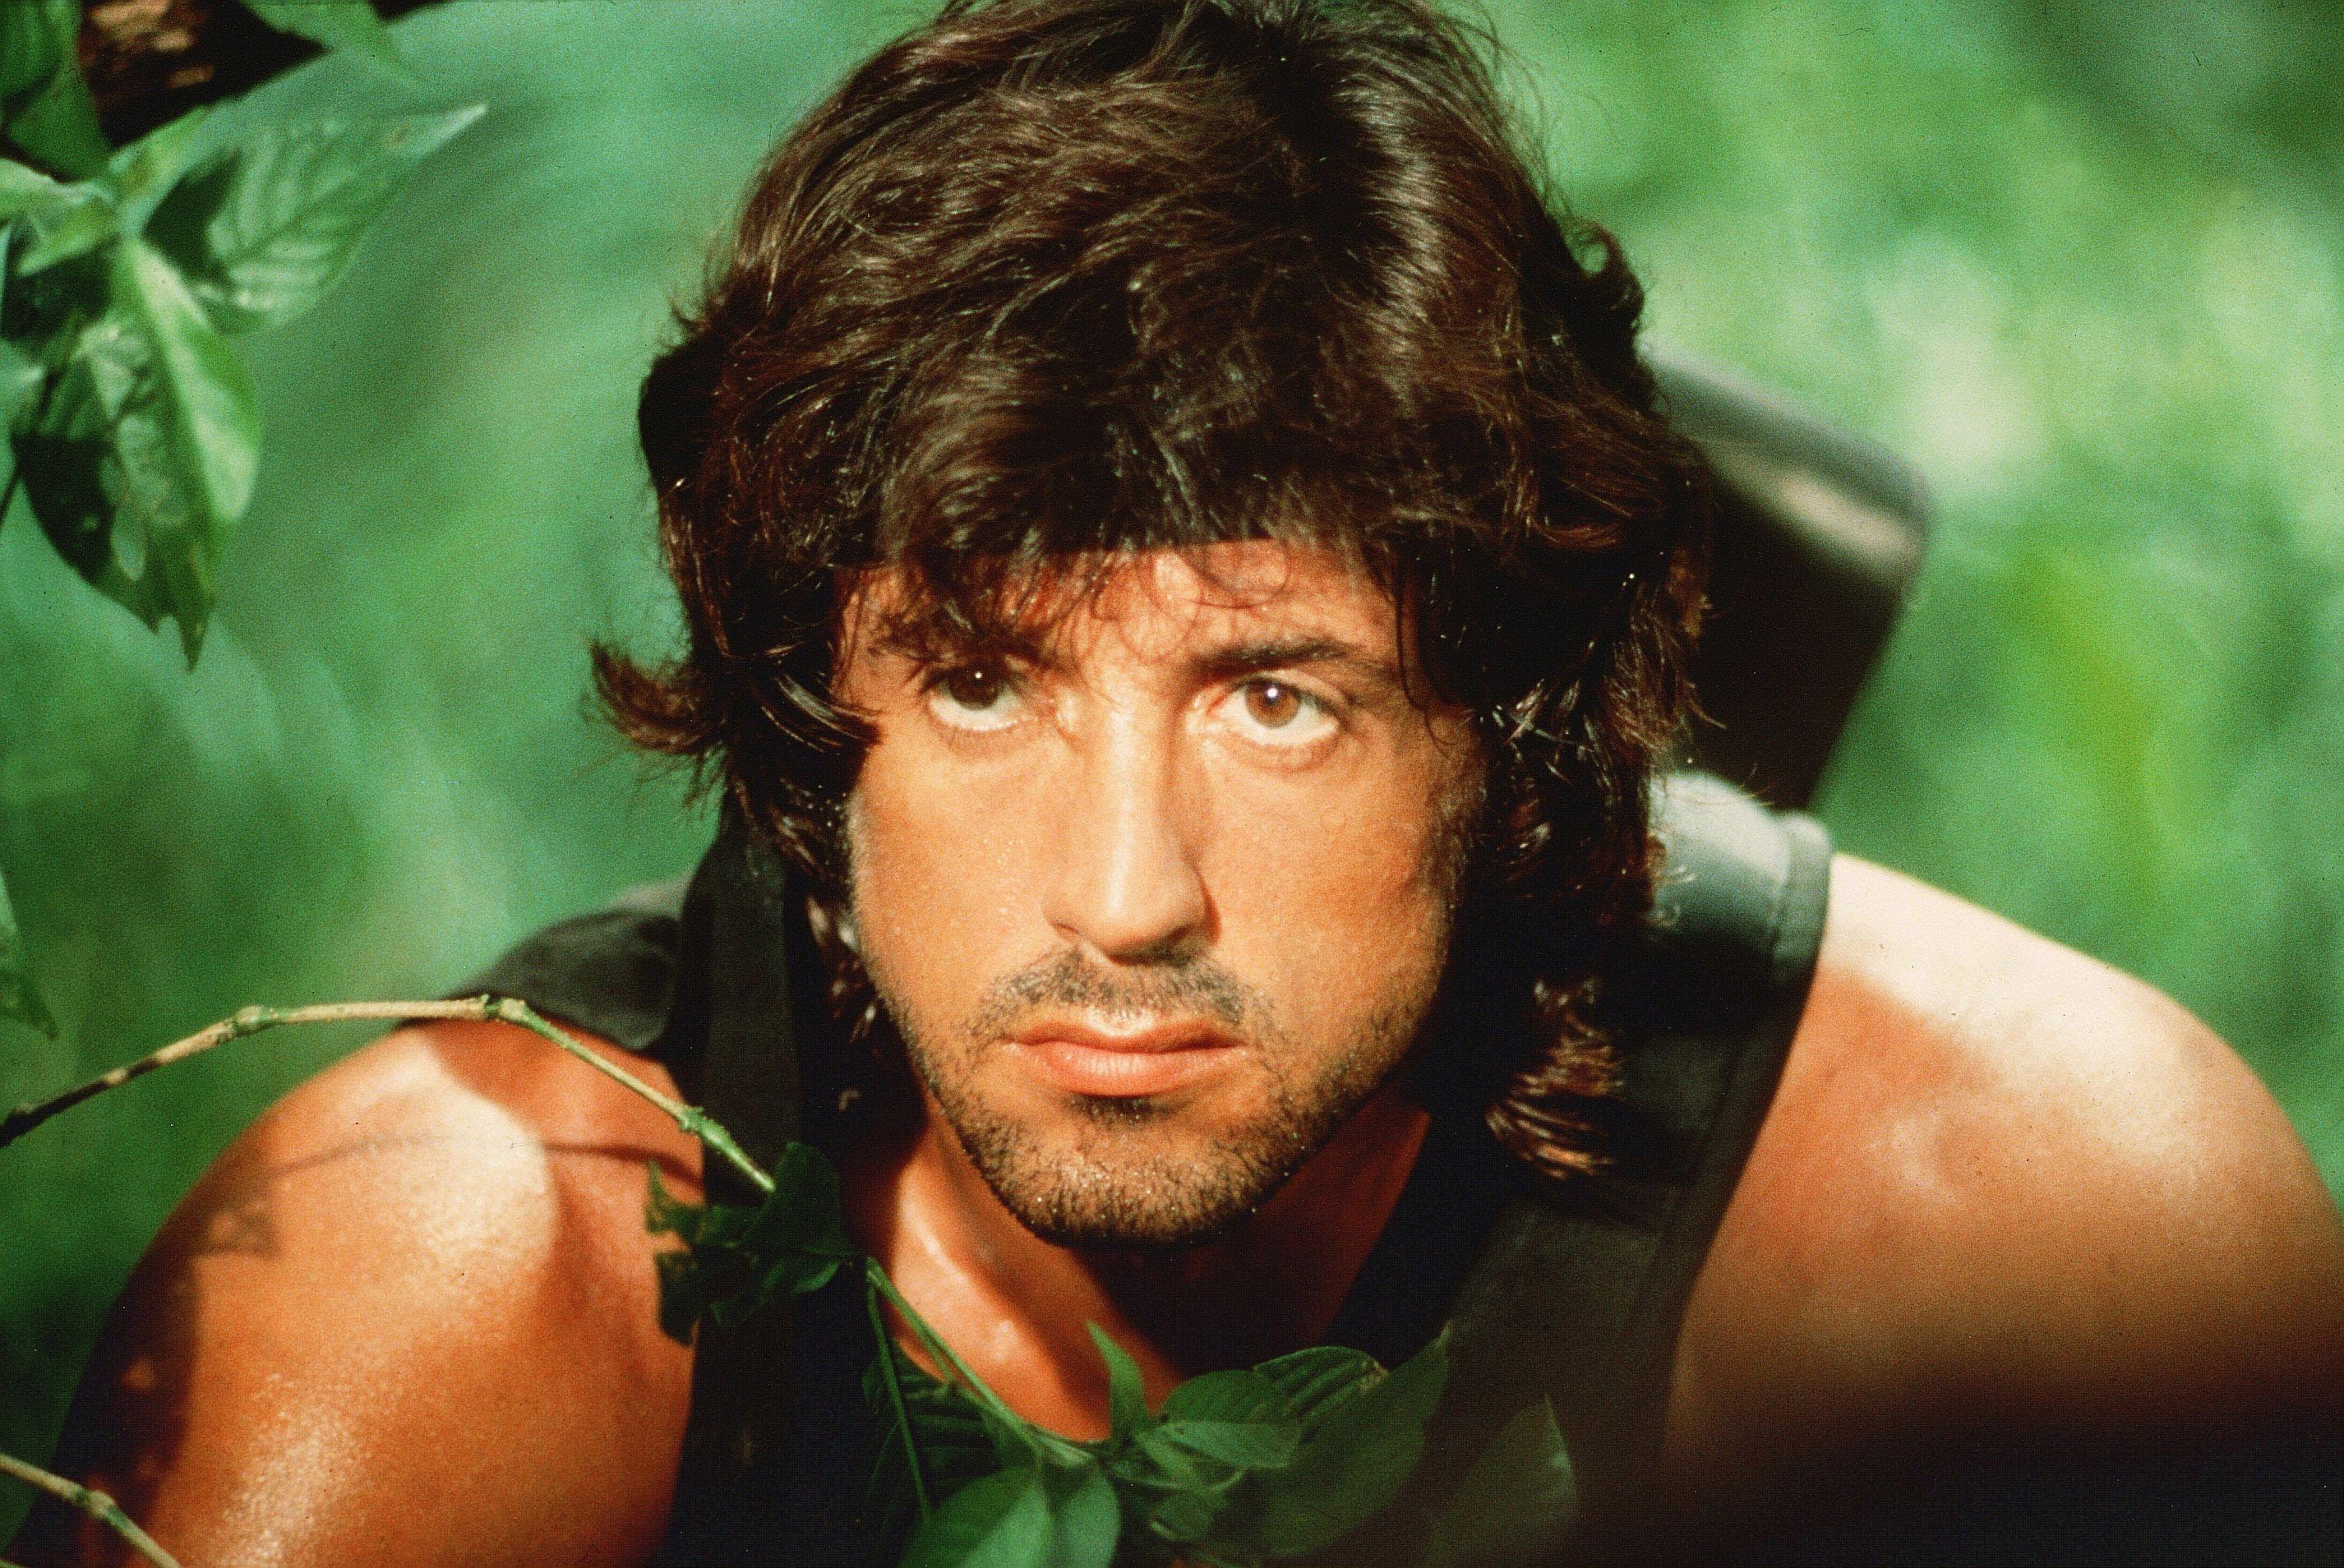 Rambo First Blood:
When the police are spraying Rambo's back with the fire hose, if you look closely you 

can see pieces of his "scars" coming off.